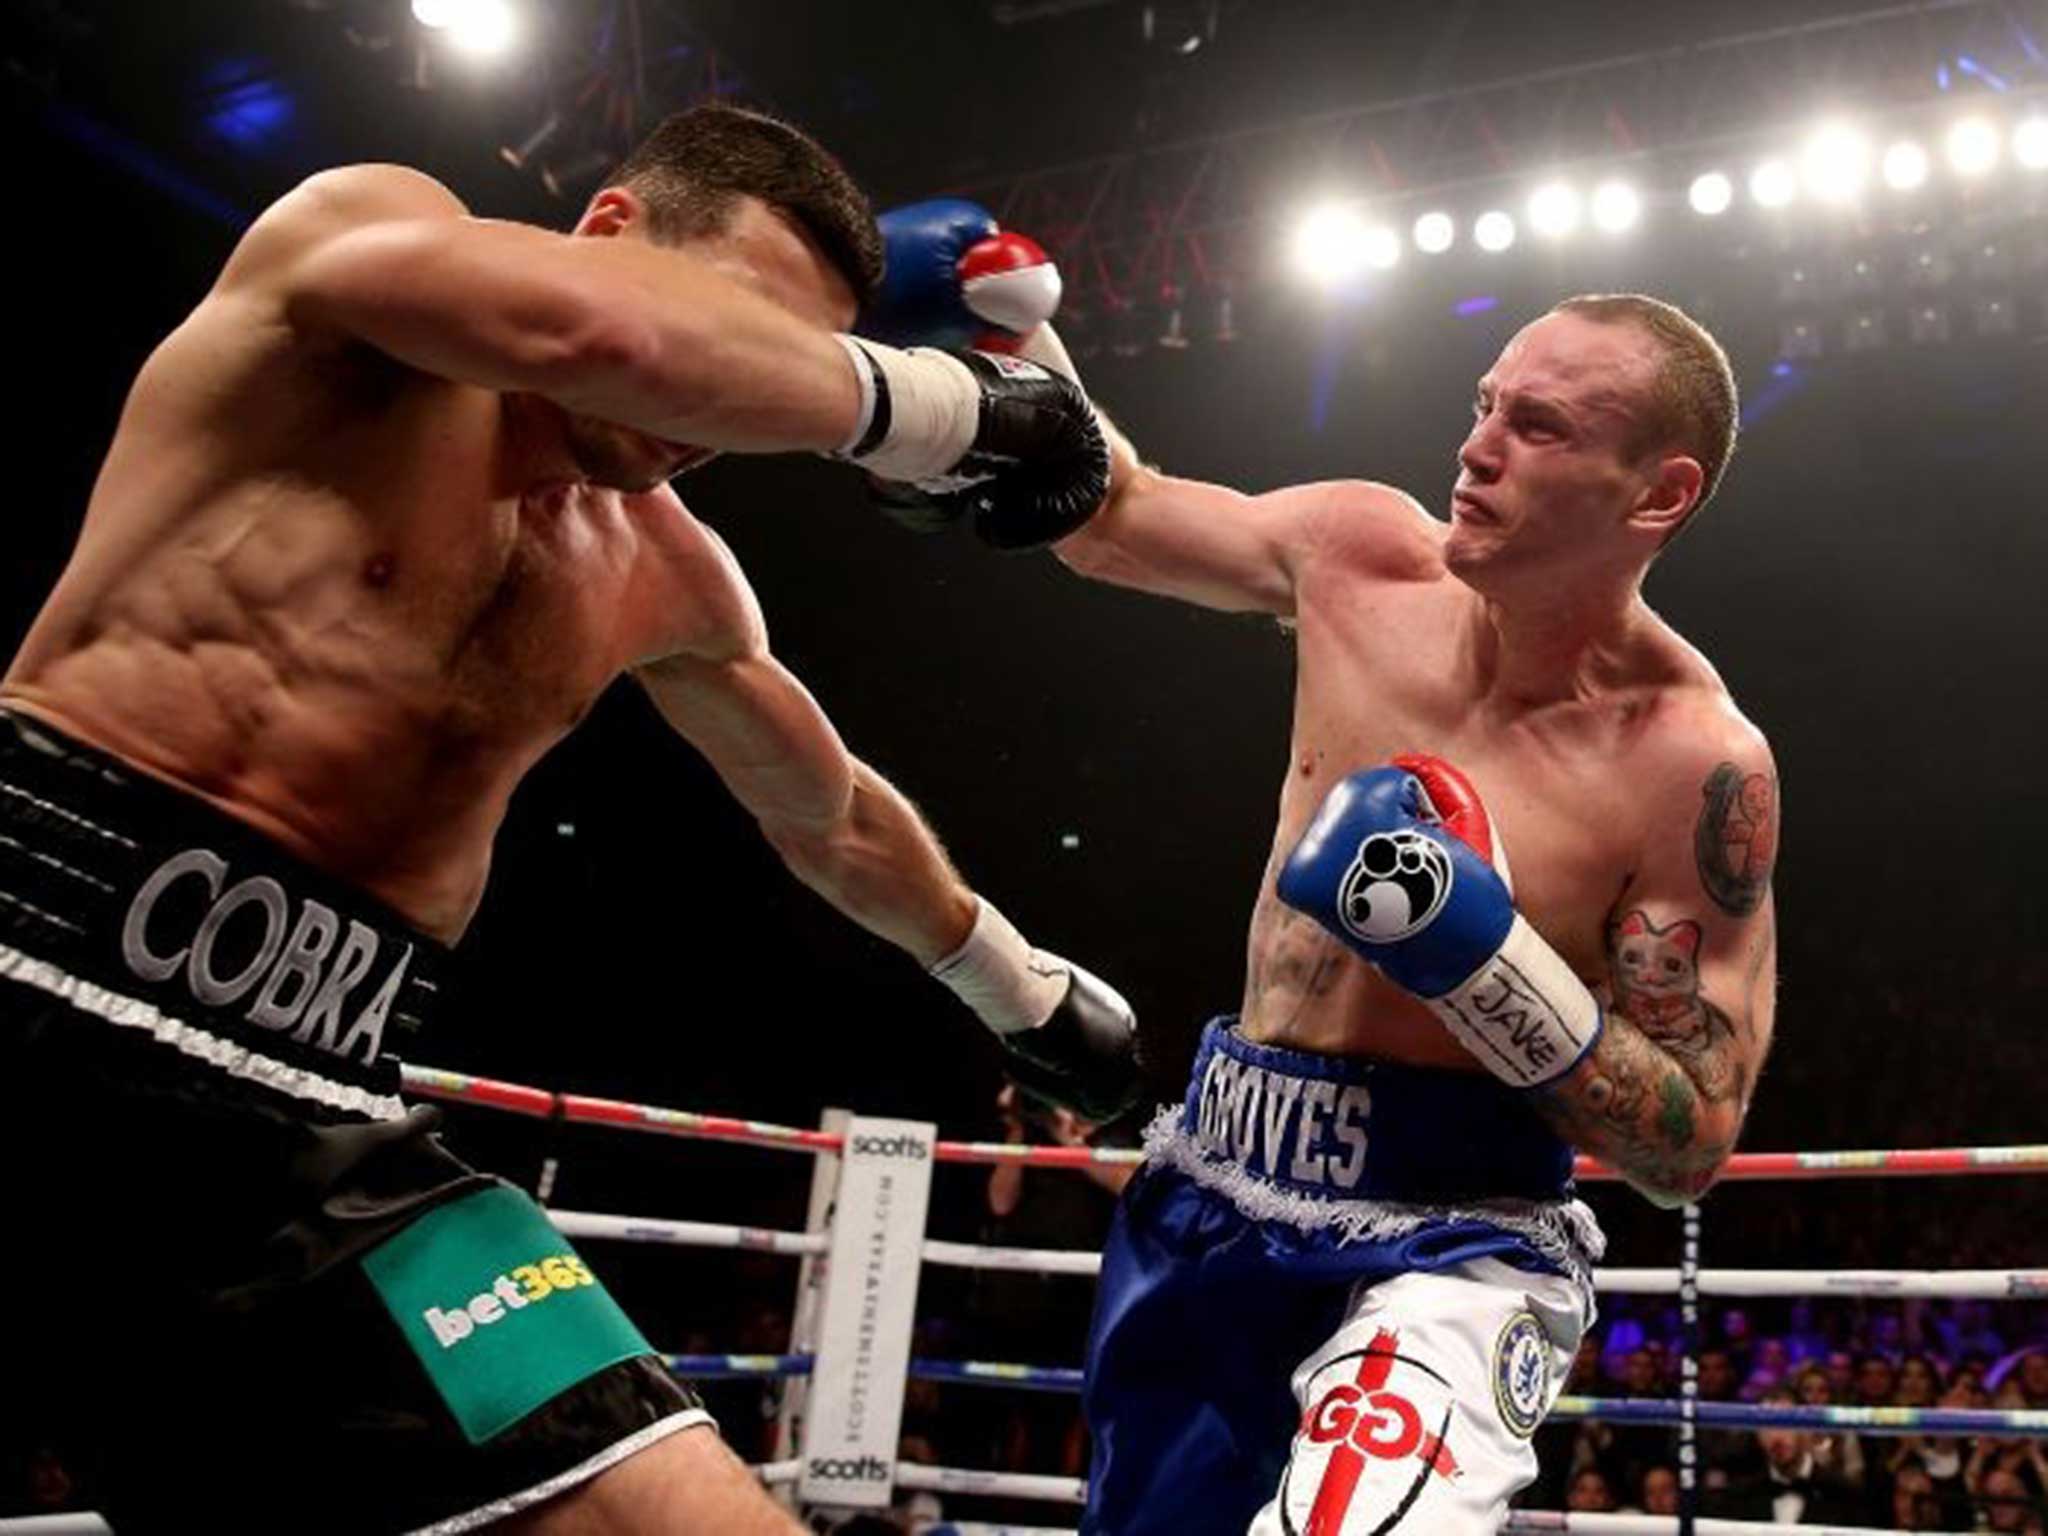 George Groves lands a blow on Carl Froch in their first fight last November